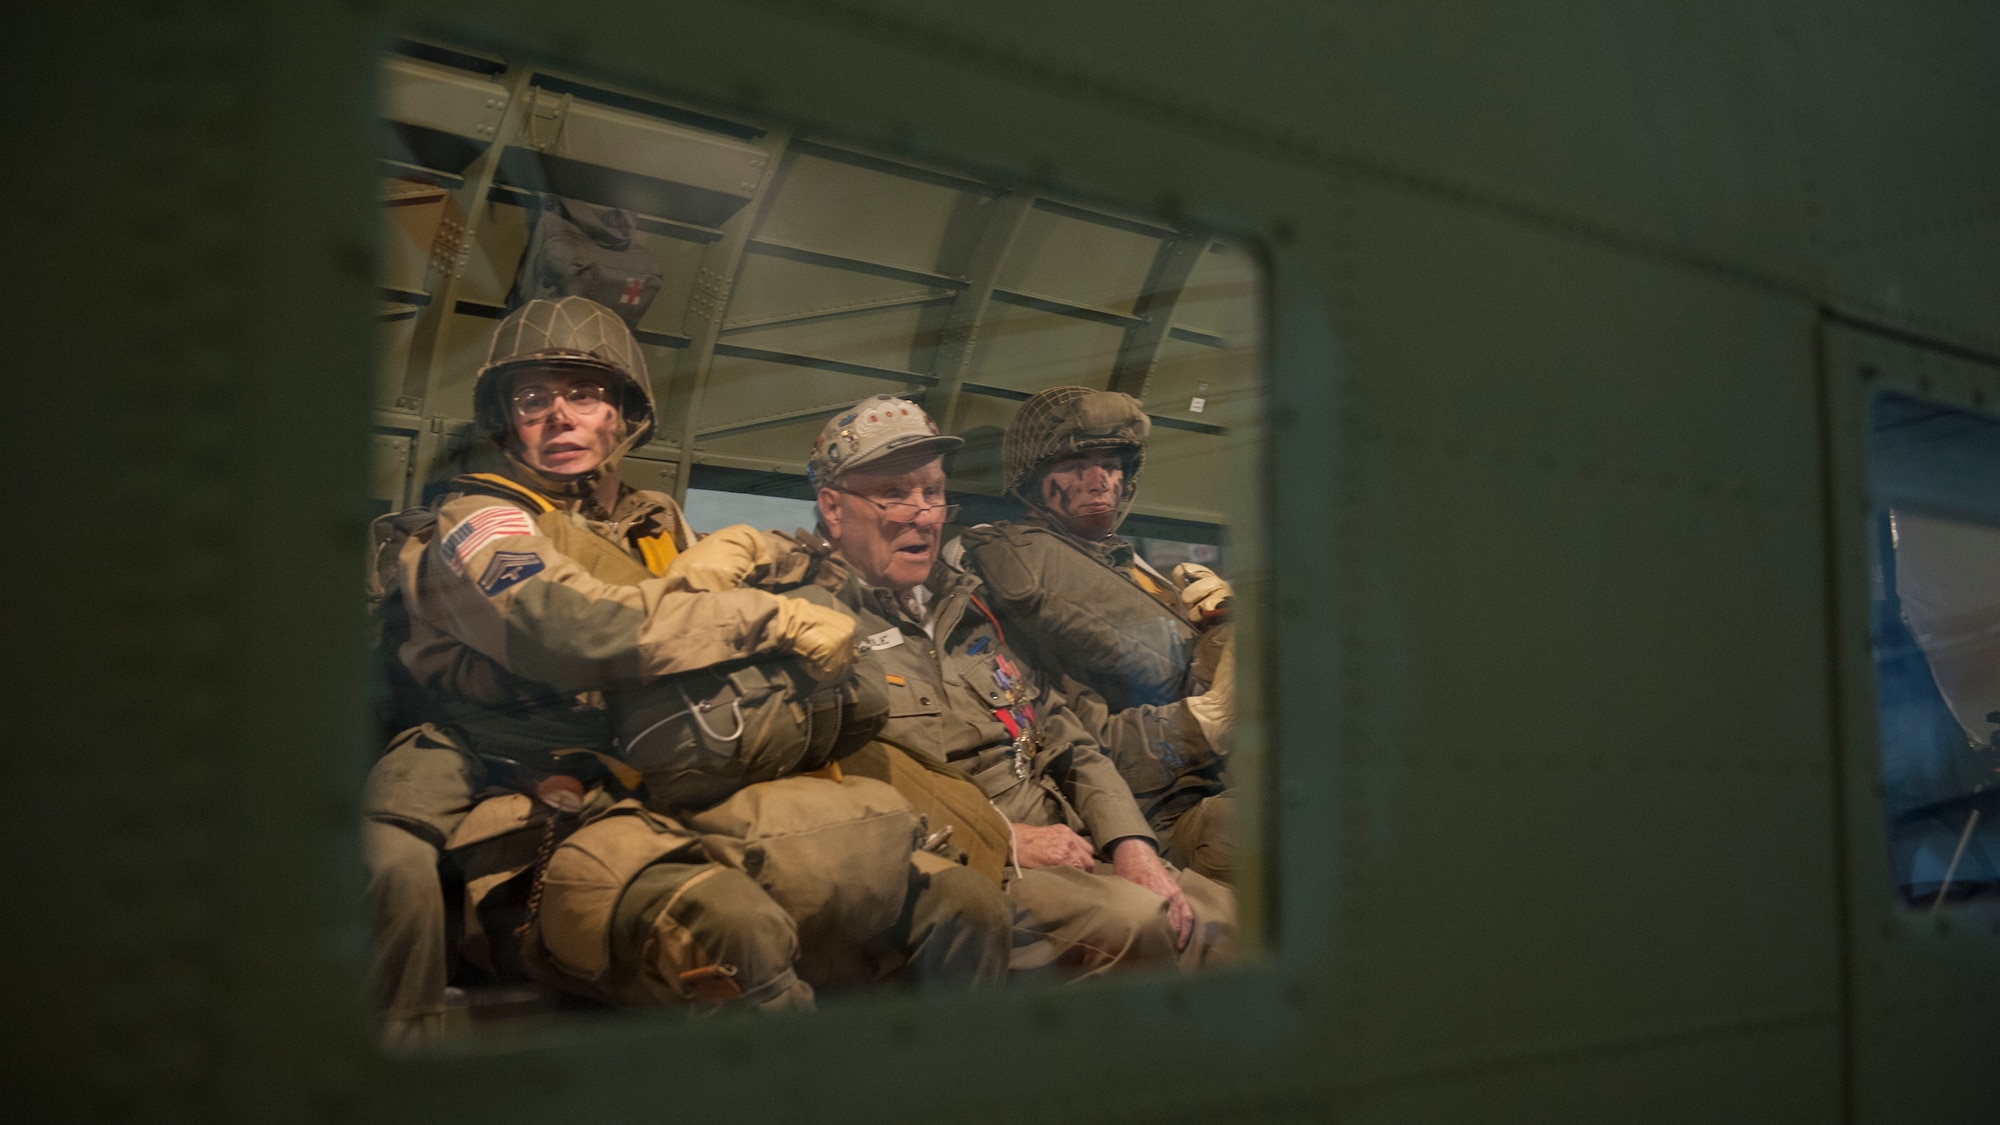 George Shenkle sits in between Daniel Dillier and Christian Holland, re-enactors depicting World War II-era paratroopers from the 82nd Airborne Division, onboard a C-47A Skytrain April 18, 2015, at the Air Mobility Command Museum near Dover Air Force Base, Del. (U.S. Air Force photo/Airman 1st Class Zachary Cacicia)